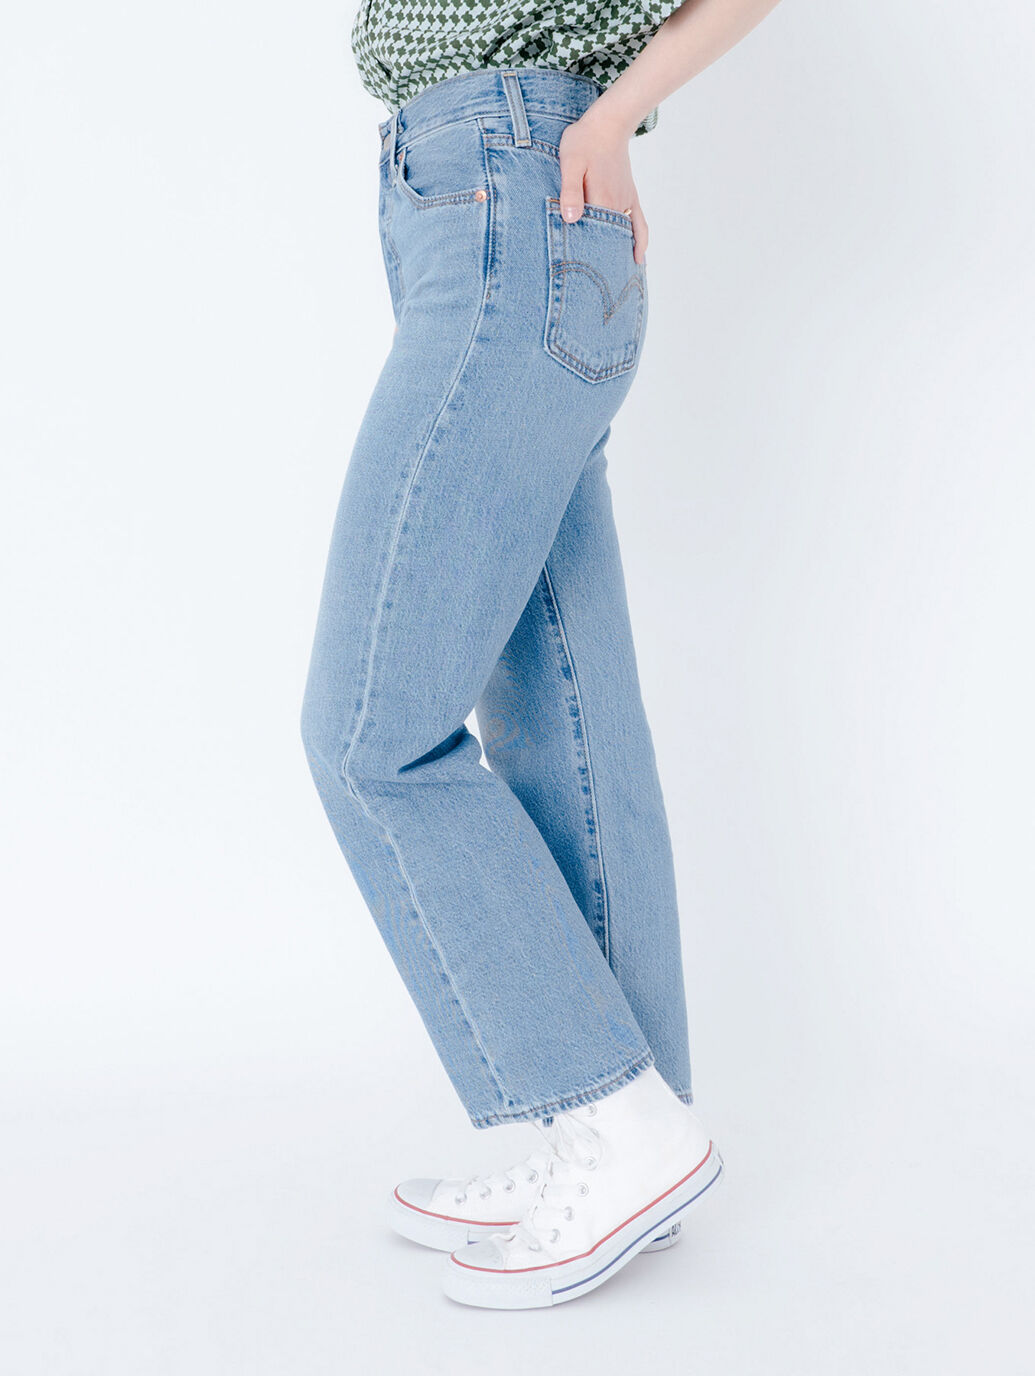 Flares Pepe Jeans Women gray Flares PEPE JEANS W26 Flares Pepe Jeans Women T 34-36 Women Clothing Pepe Jeans Women Jeans Pepe Jeans Women Boot-cut Jeans Boot-cut Jeans Boot-cut Jeans 